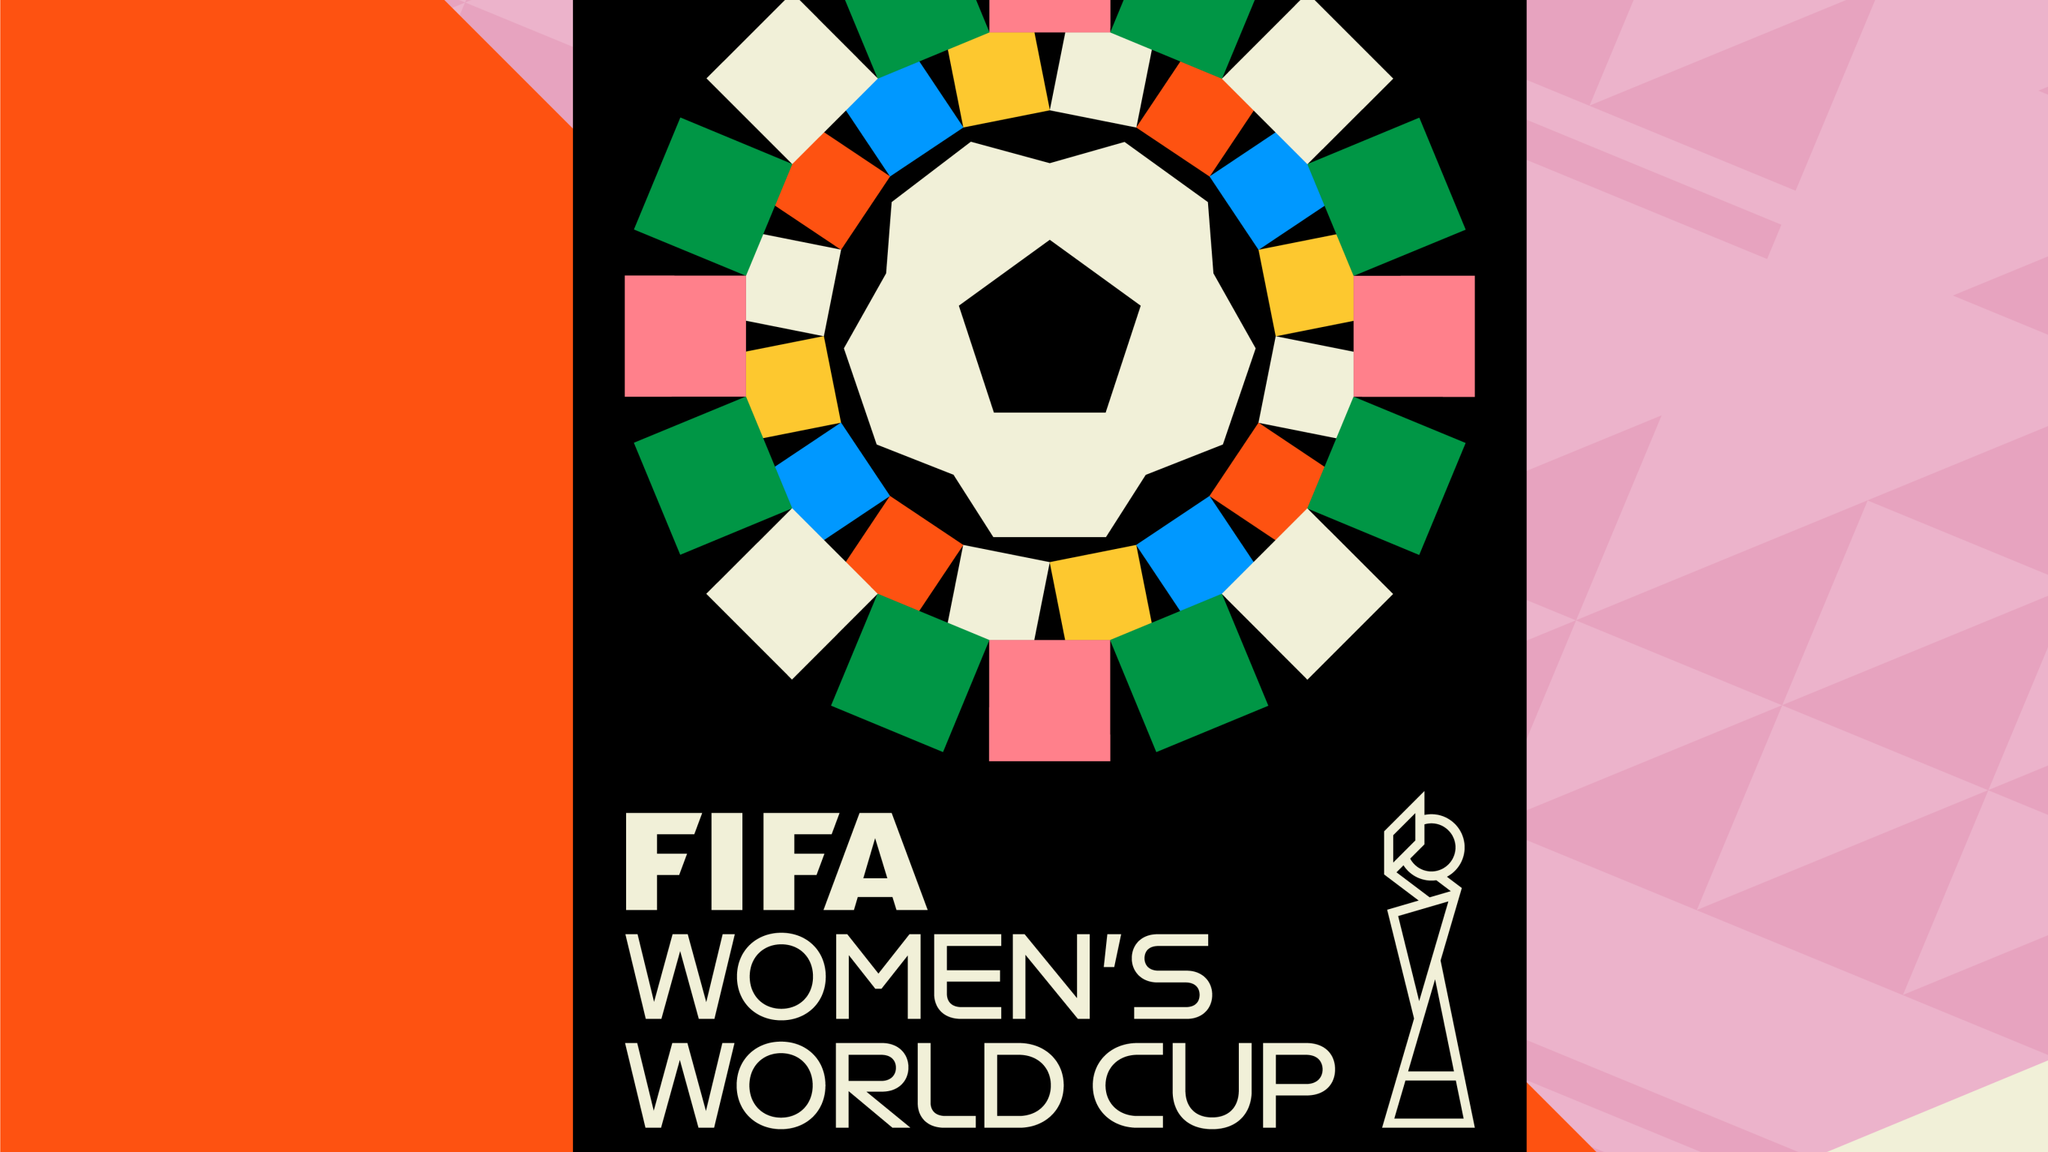 Women's World Cup Logo and slogan for 2023 tournament released by FIFA